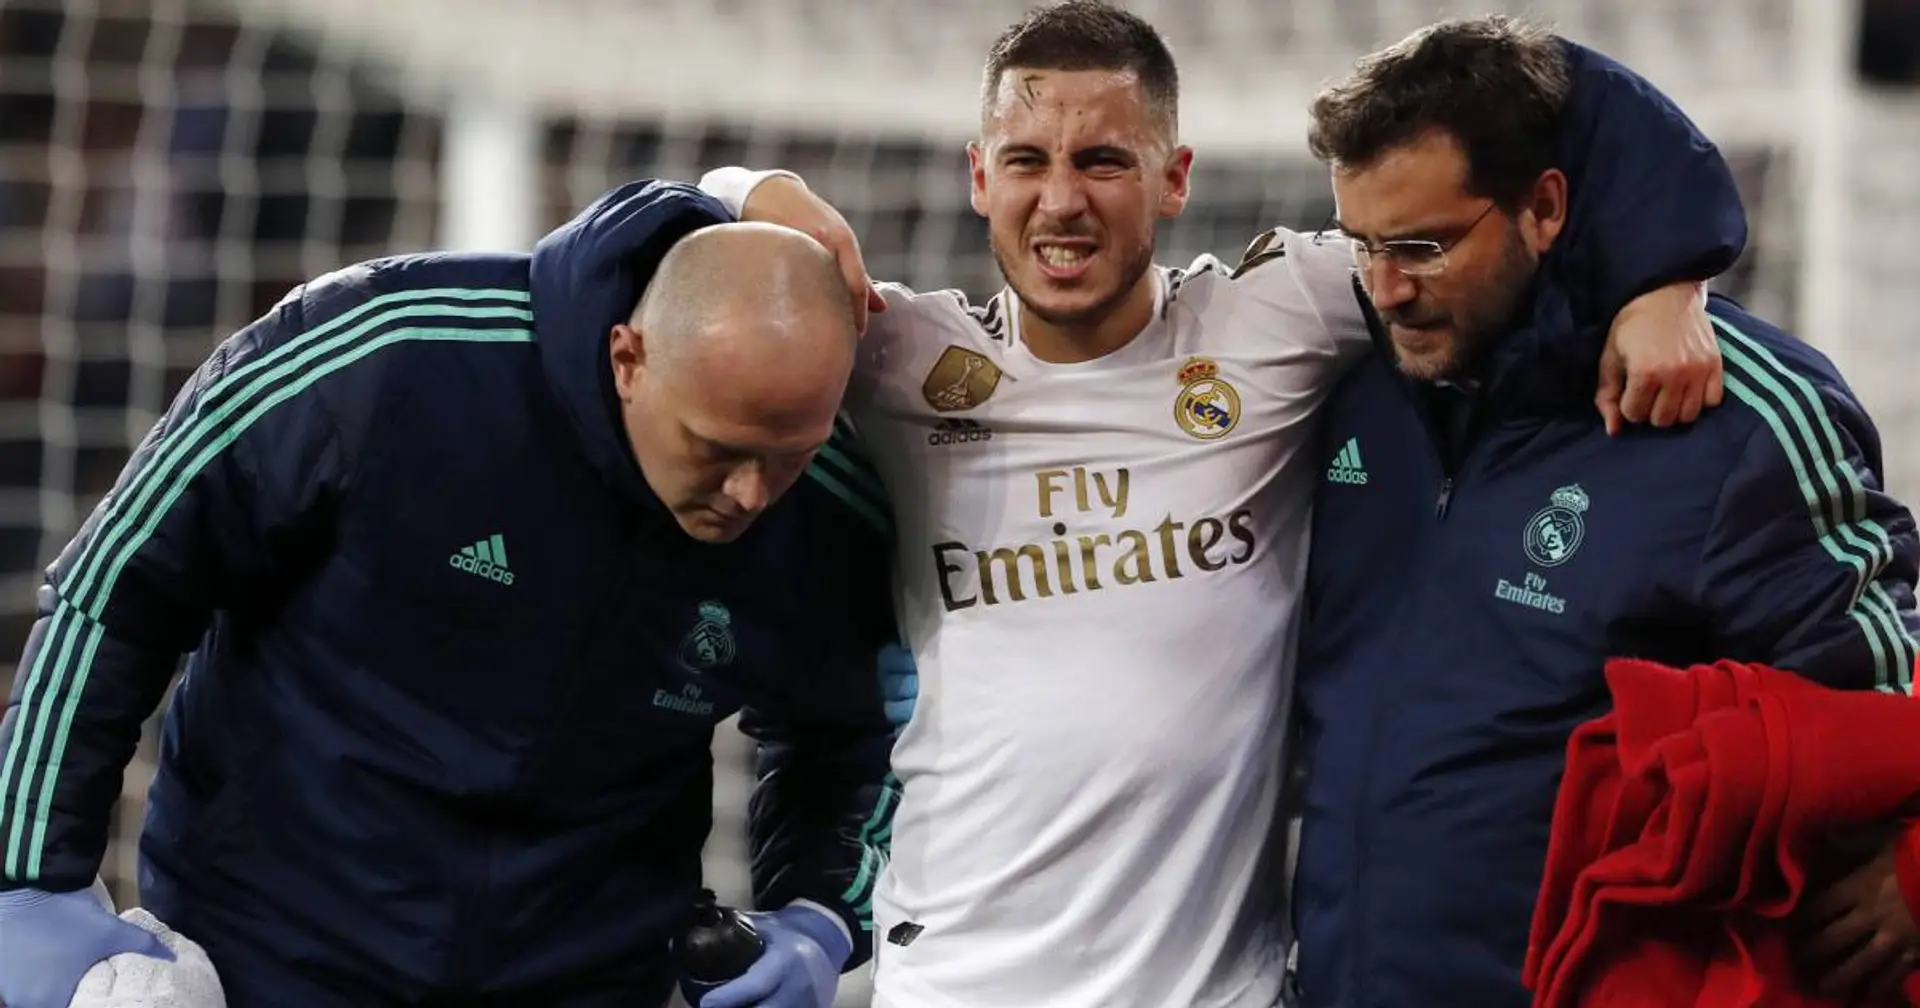 'He'll need to control it': Belgium boss gives worrying update on Hazard’s ankle problems 